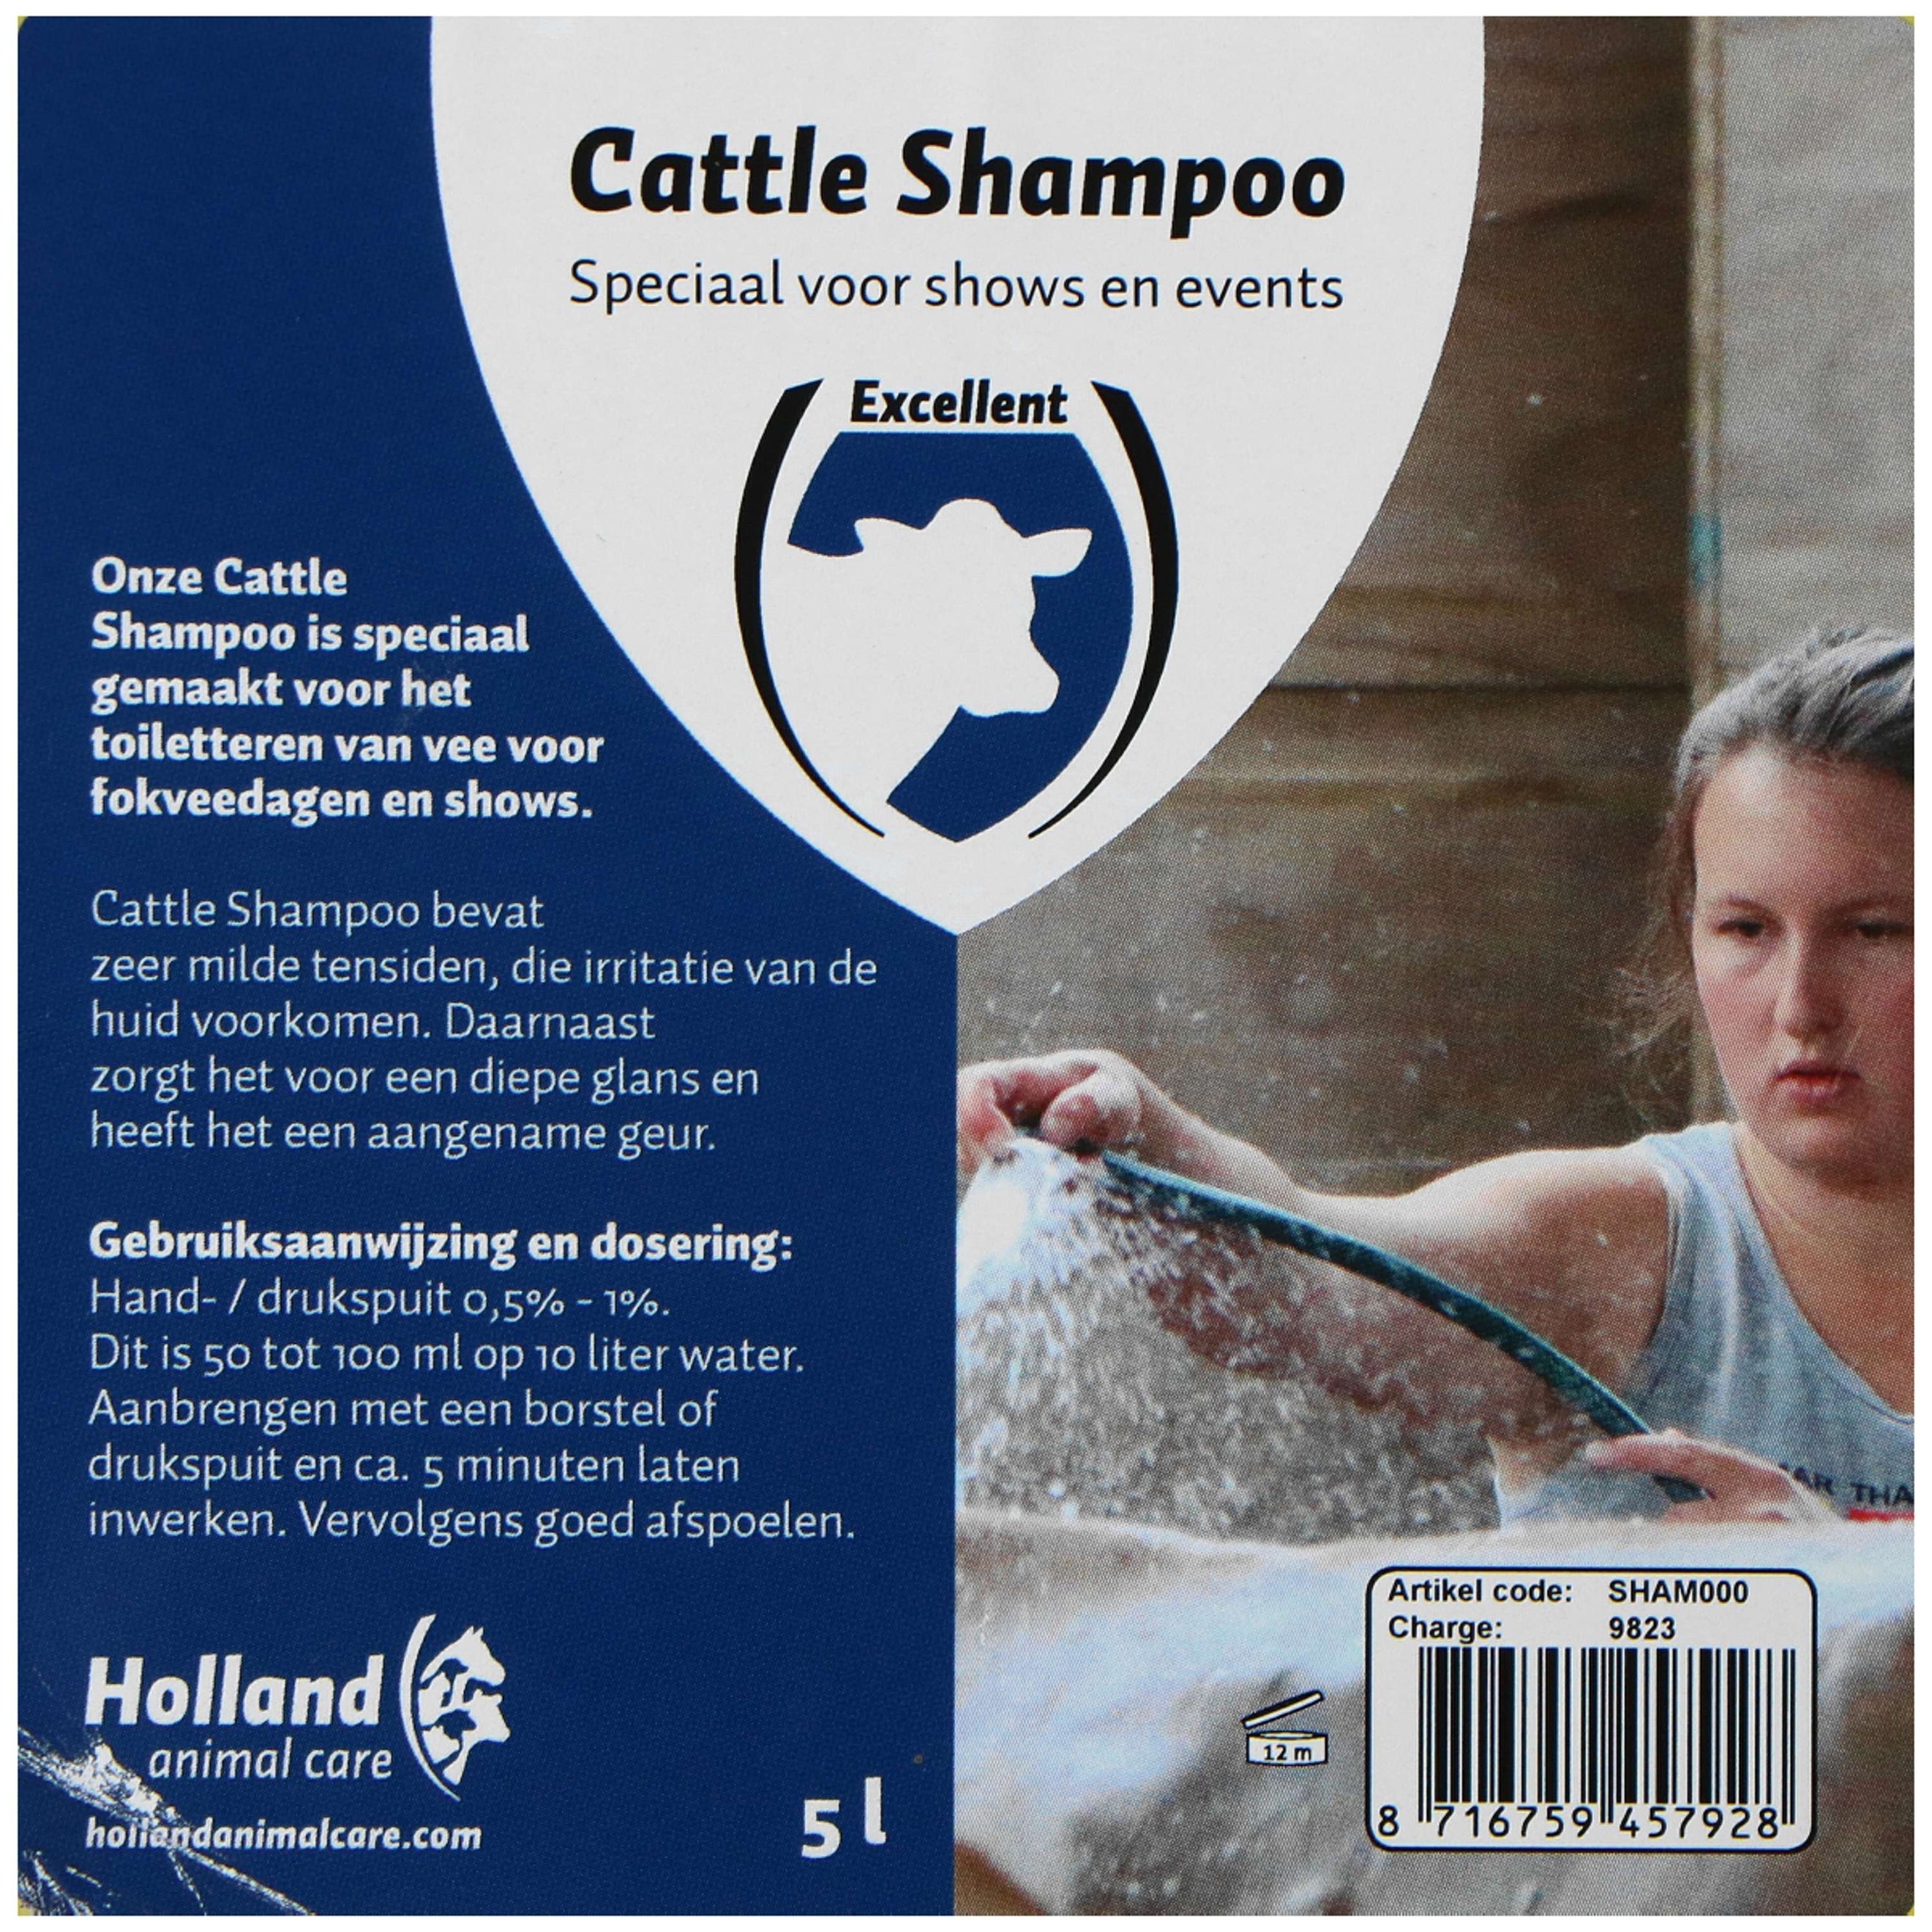 Excellent Shampooing Cattle